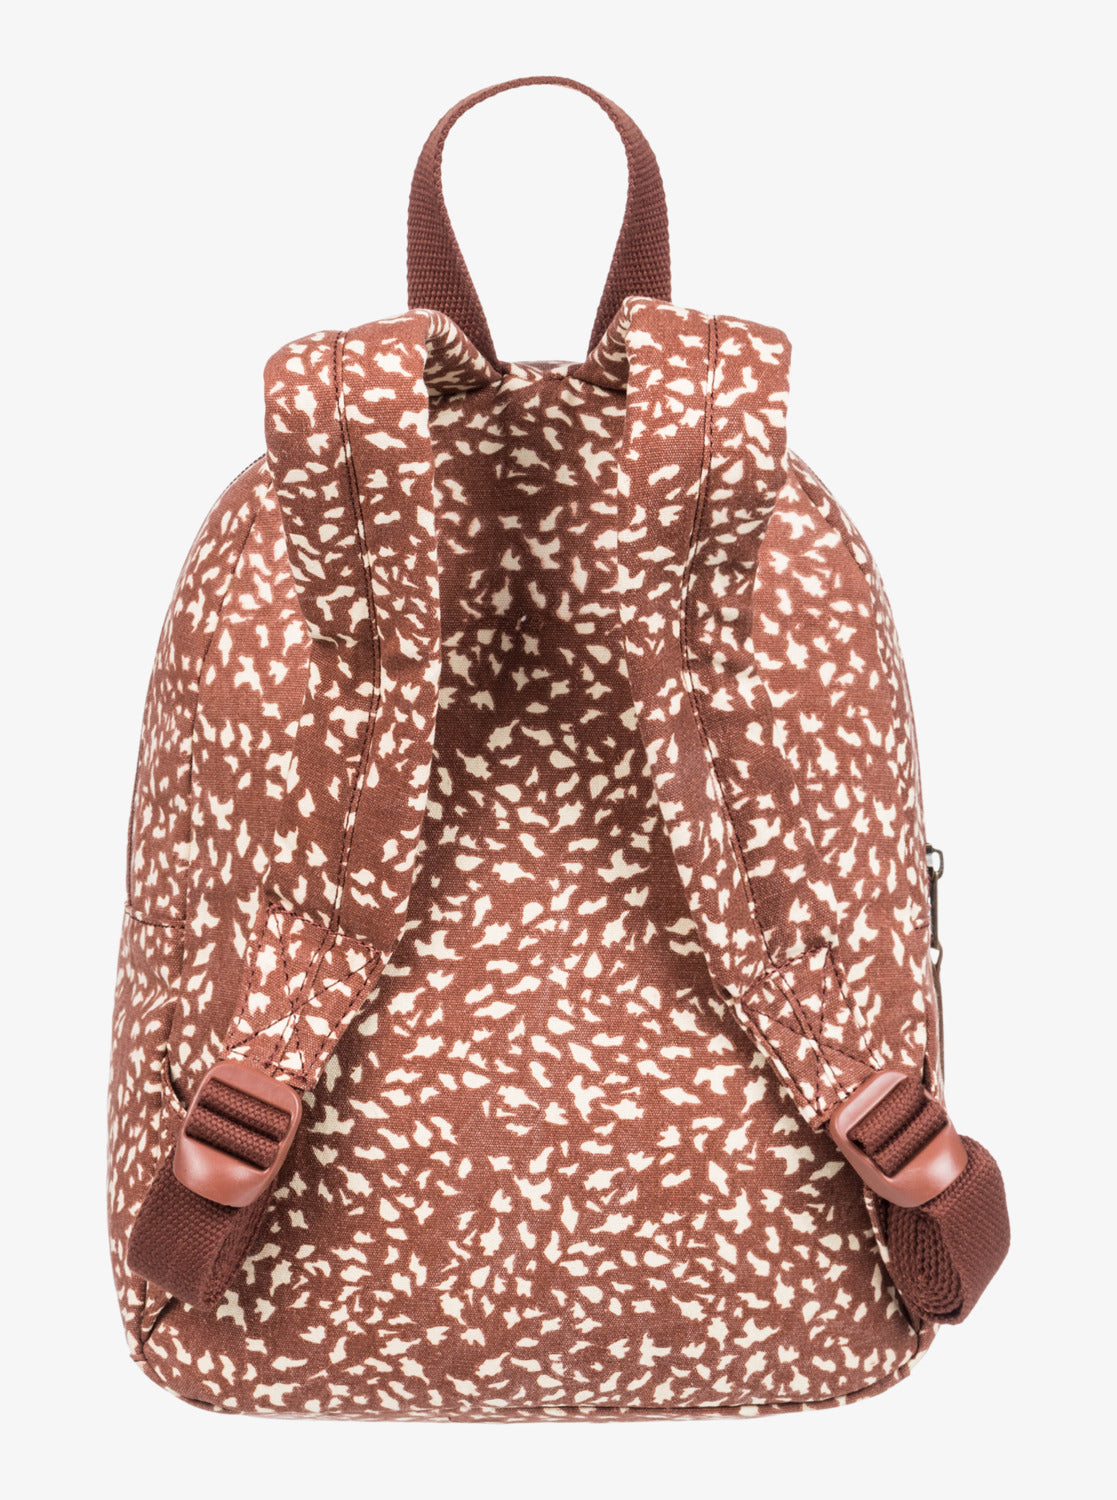 Roxy Always Core Canvas Backpack RUSTIC BROWN ANIMALIA DOTS